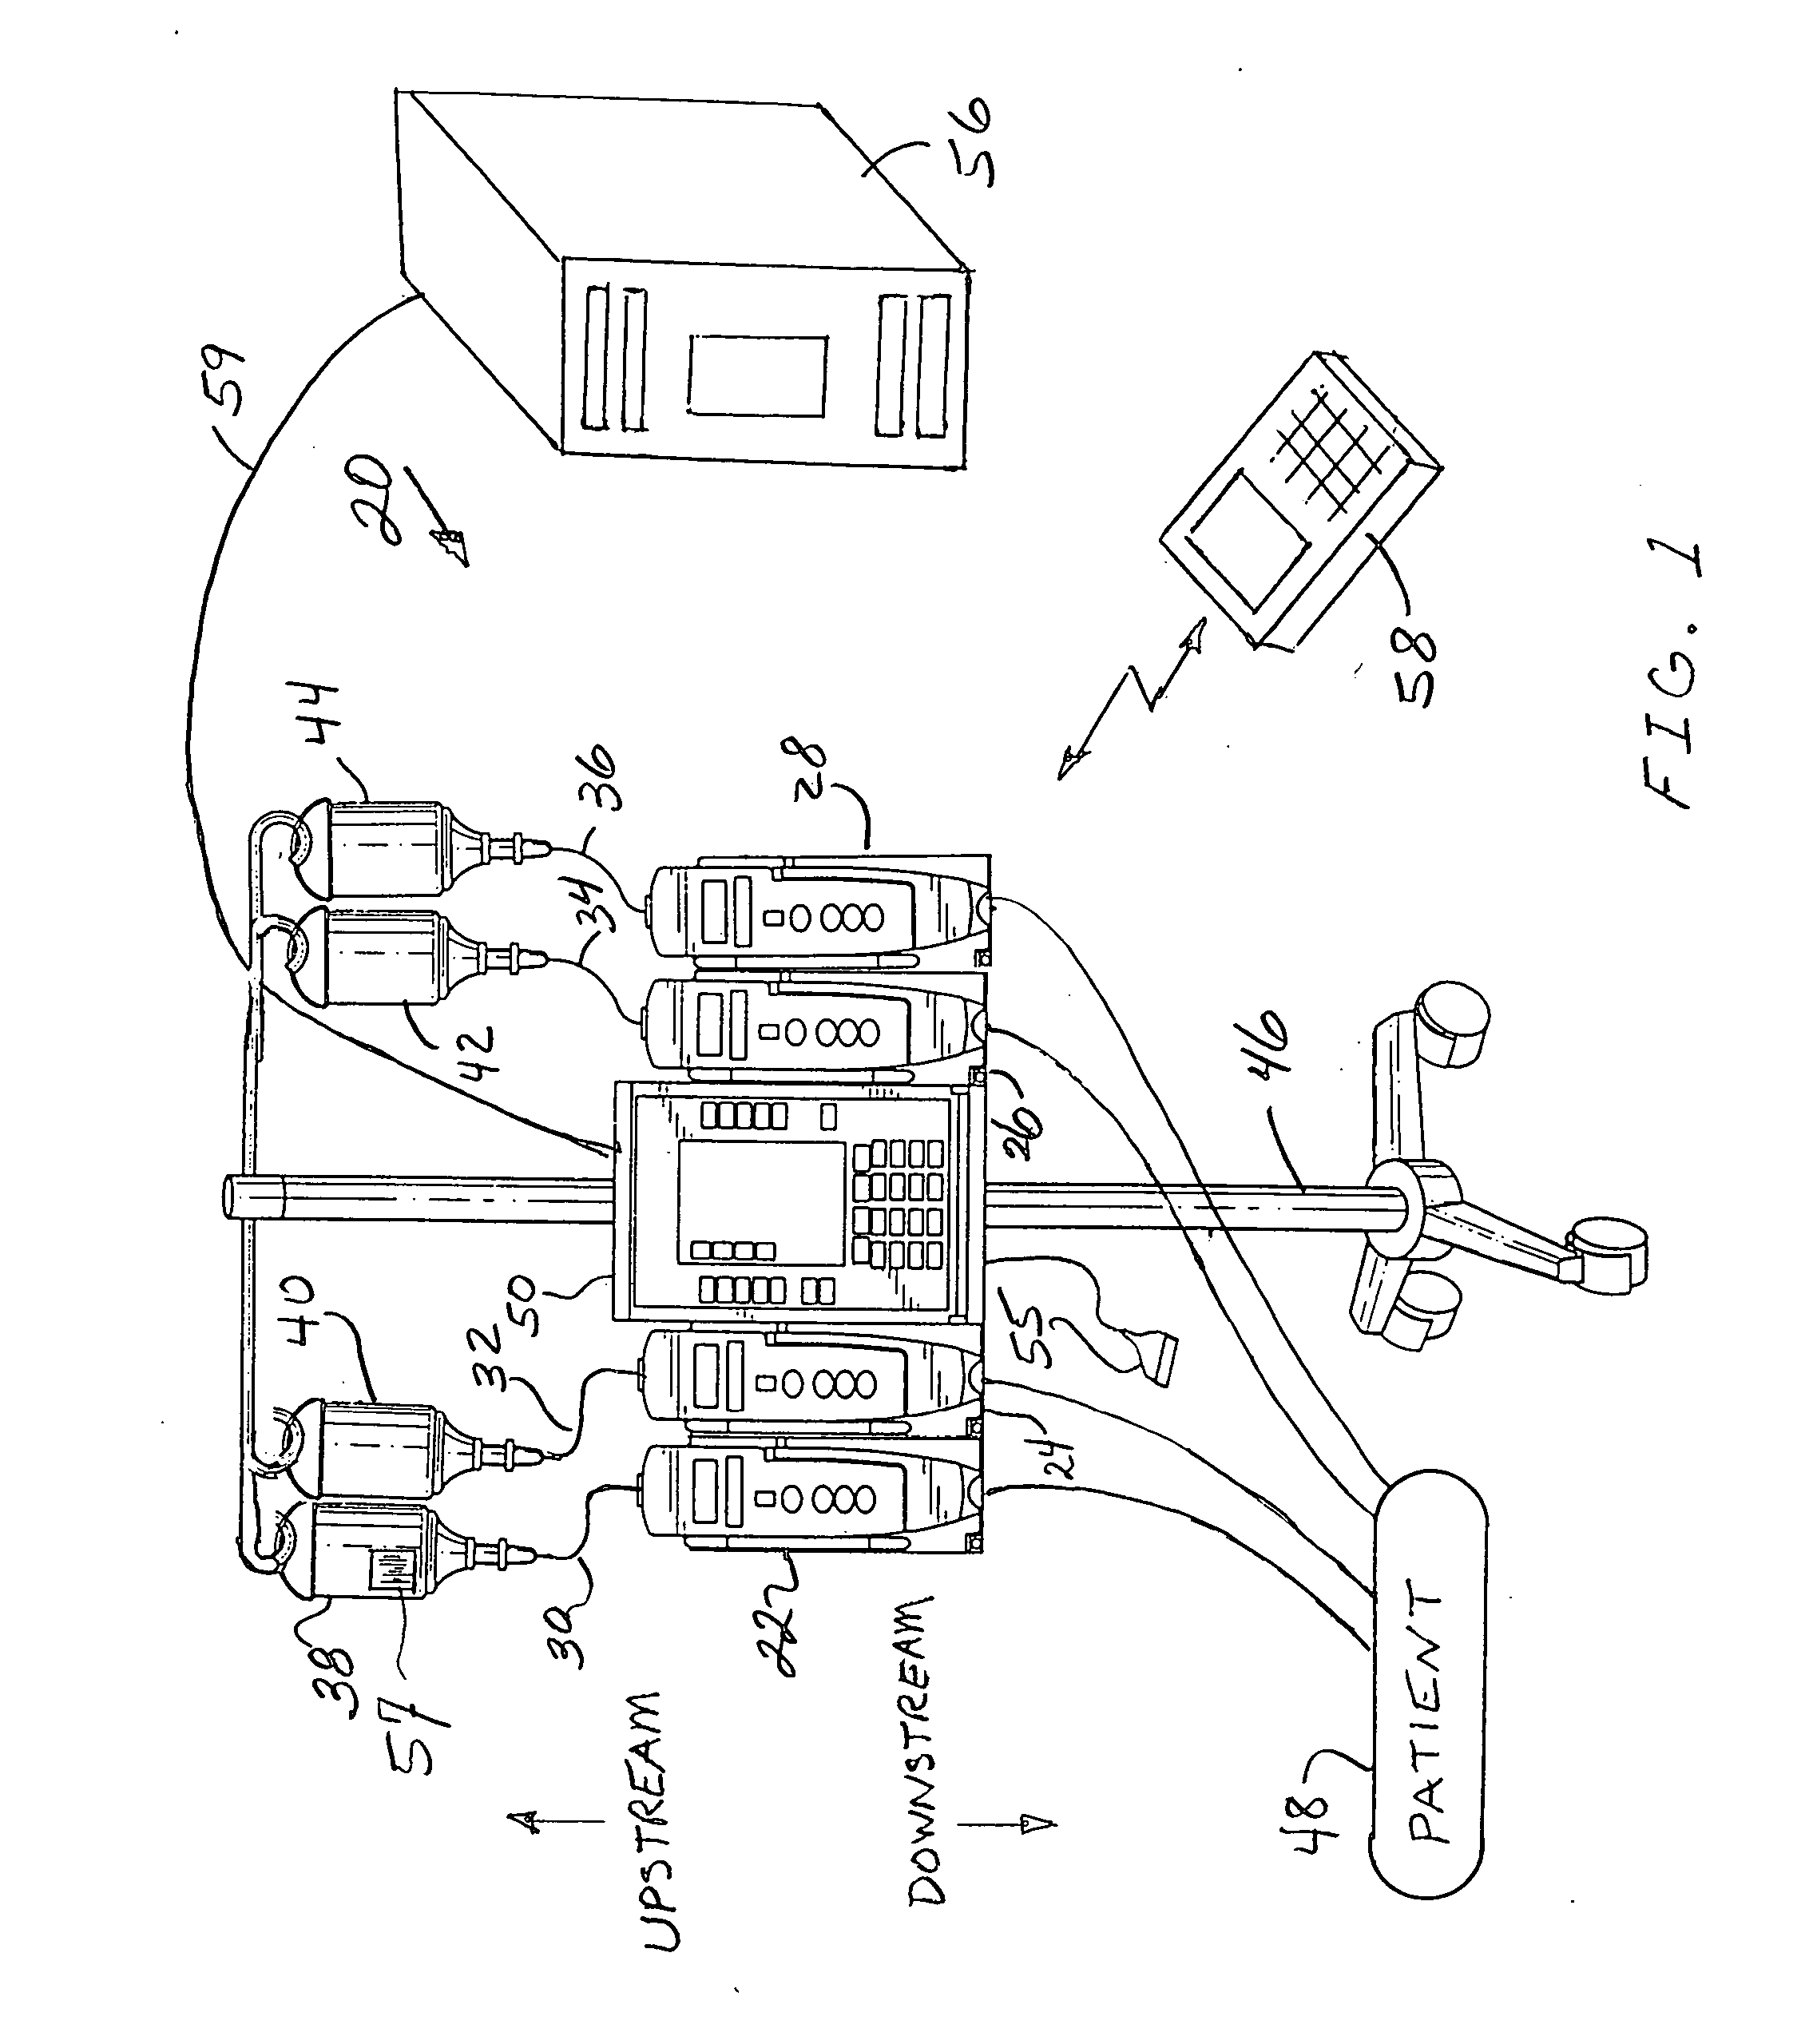 Fluid verification system and method for infusions